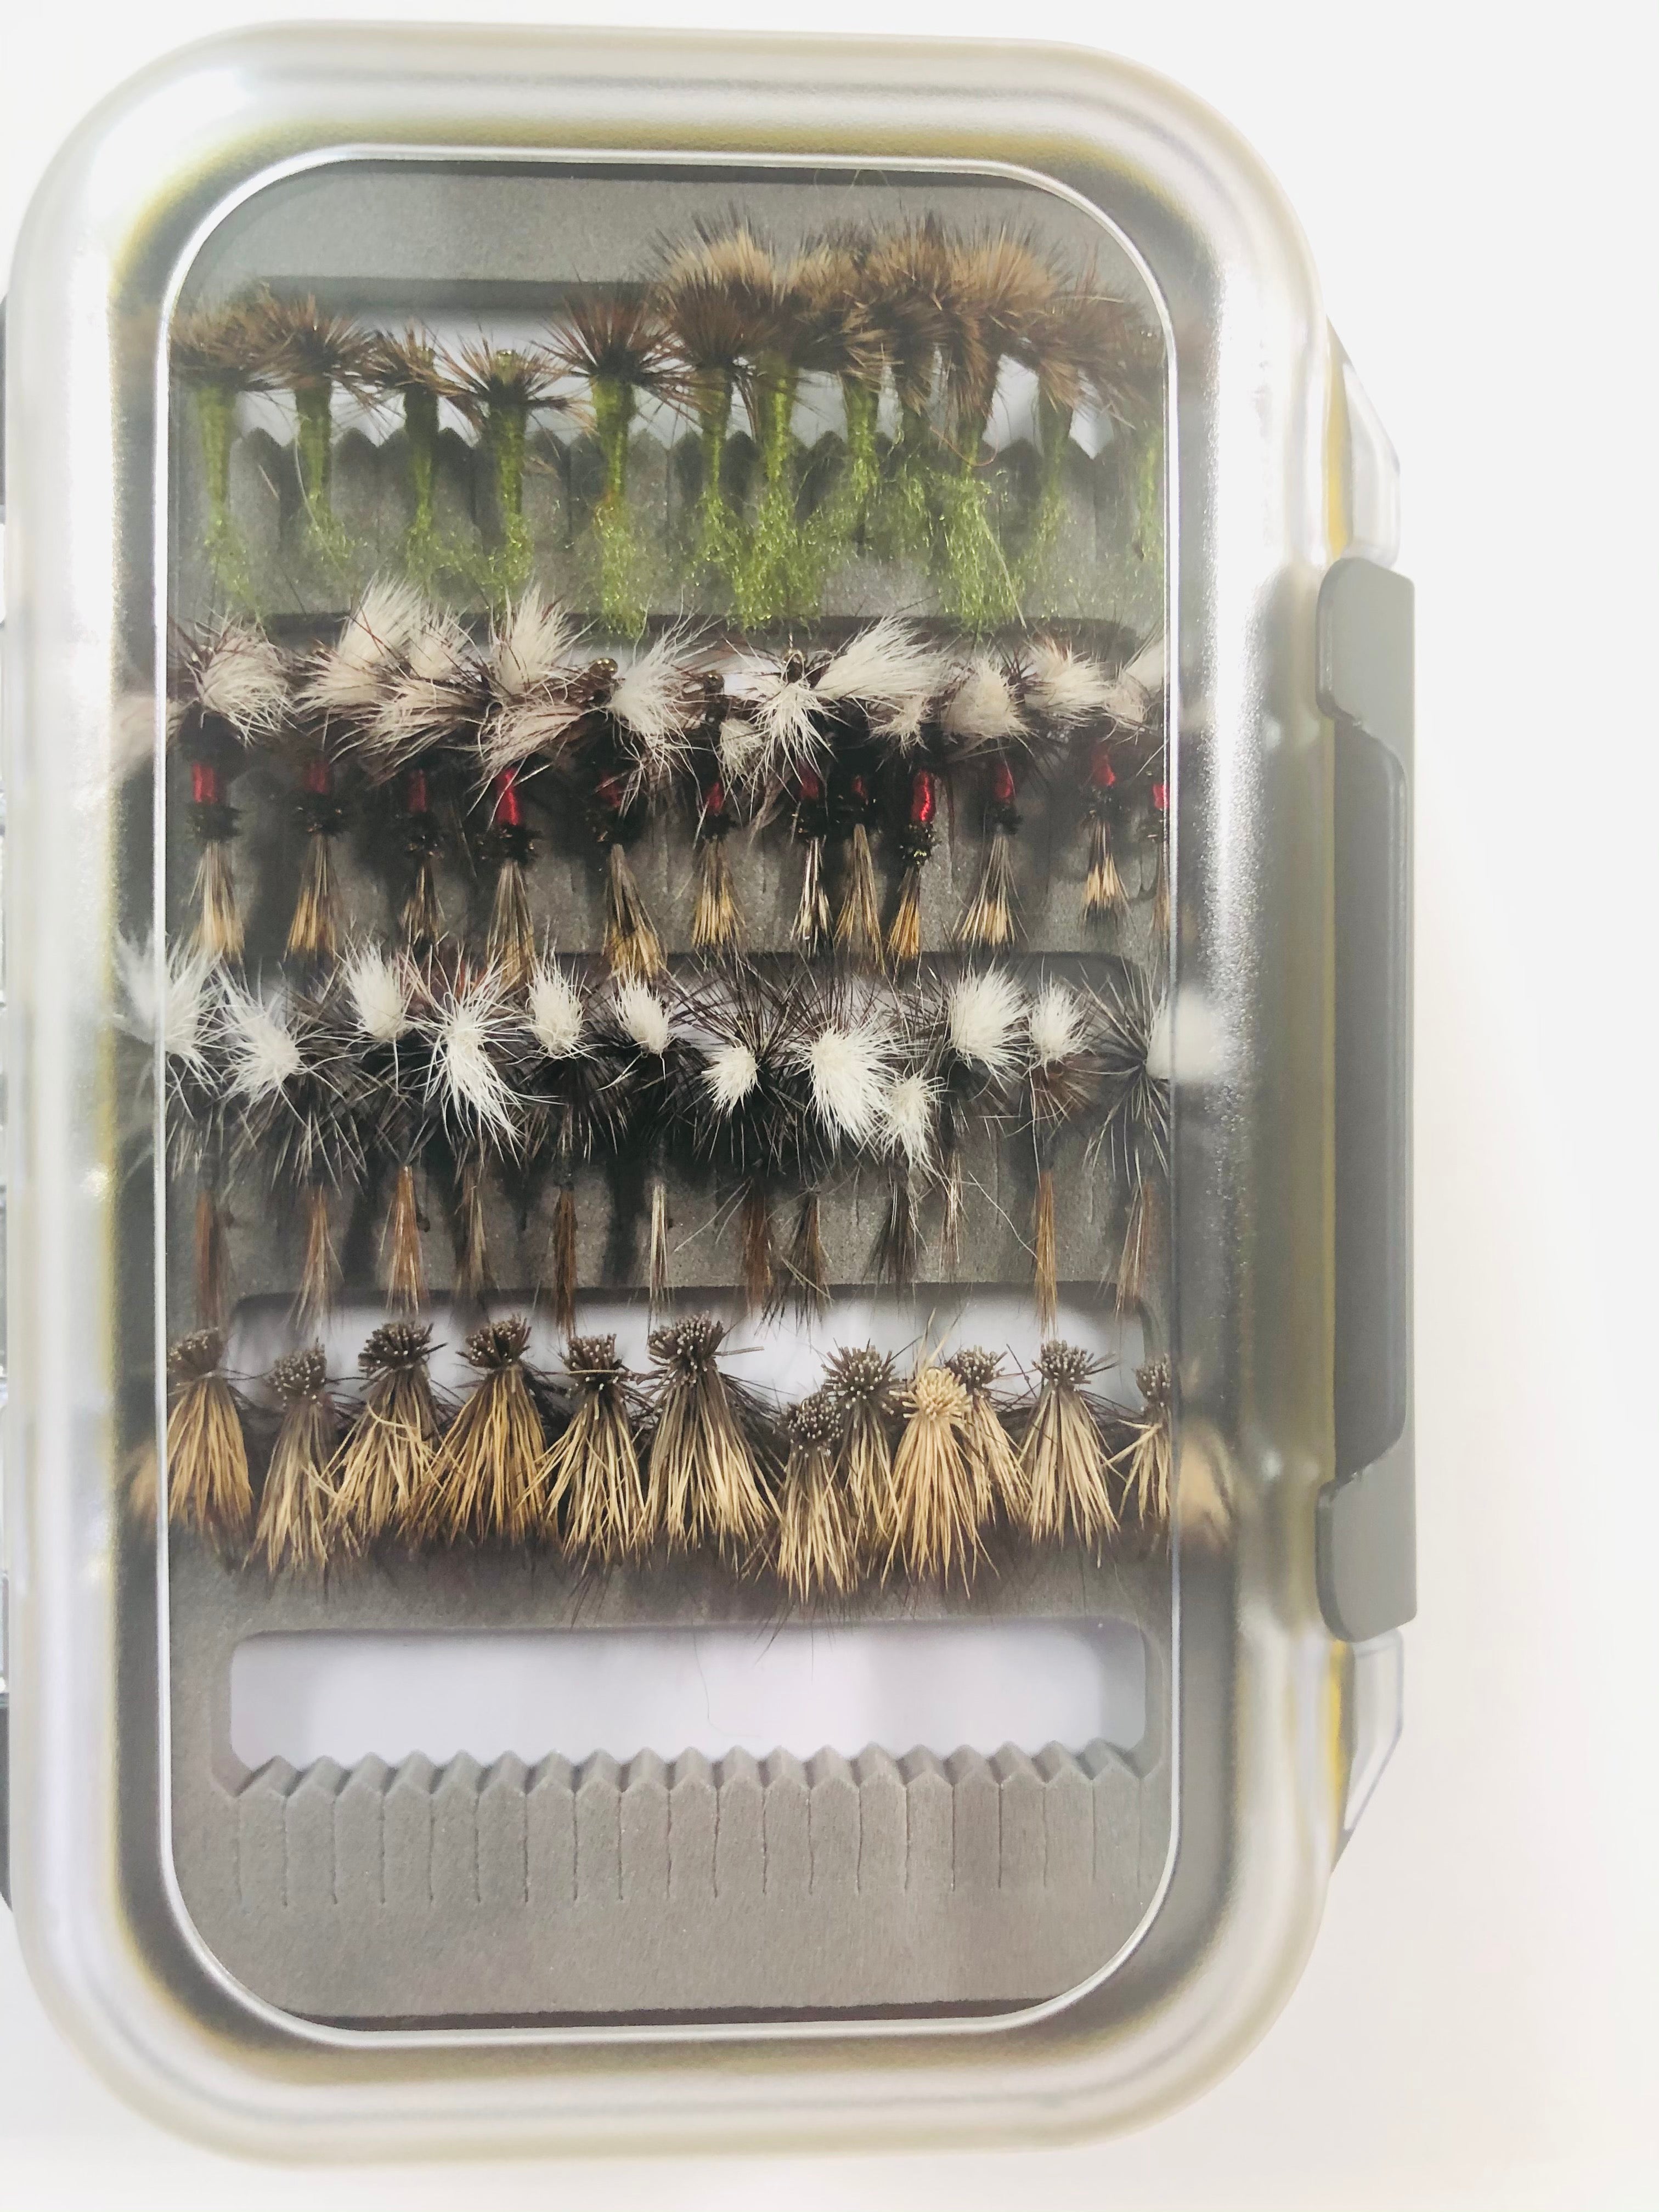 Top Dry Flies for trout